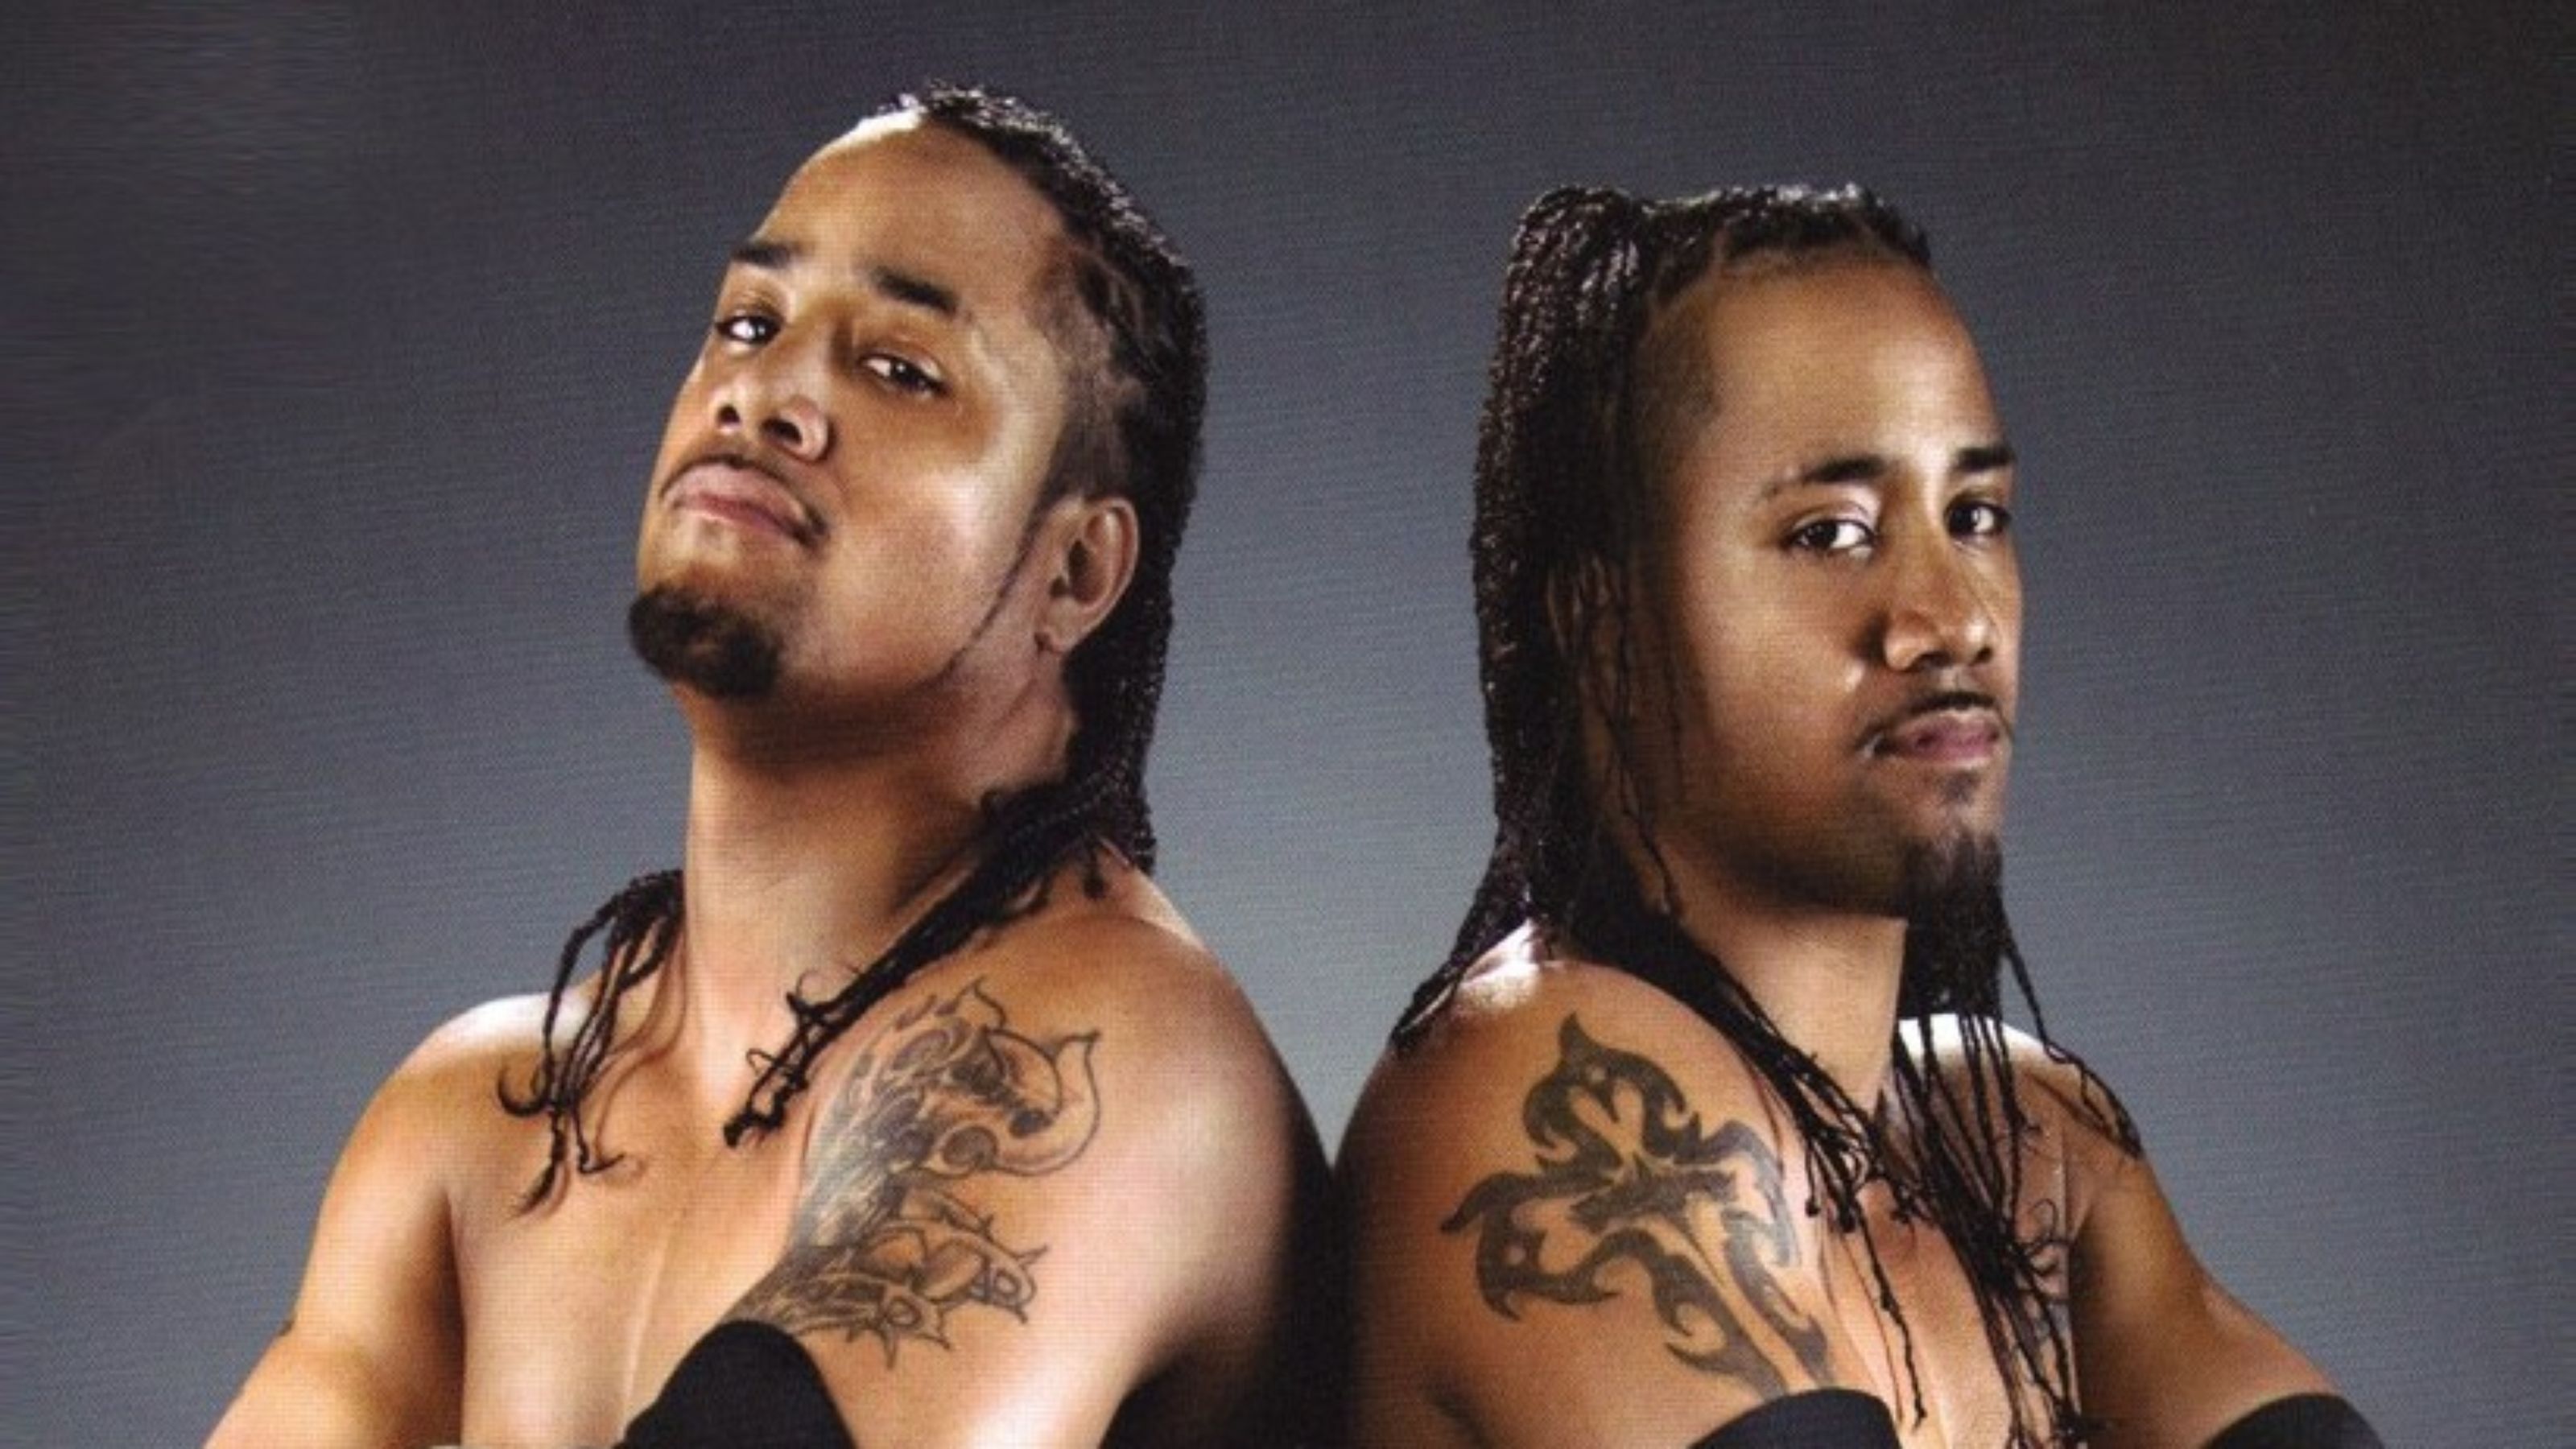 The Usos Brother Wwe HD Wallpaper Jpg